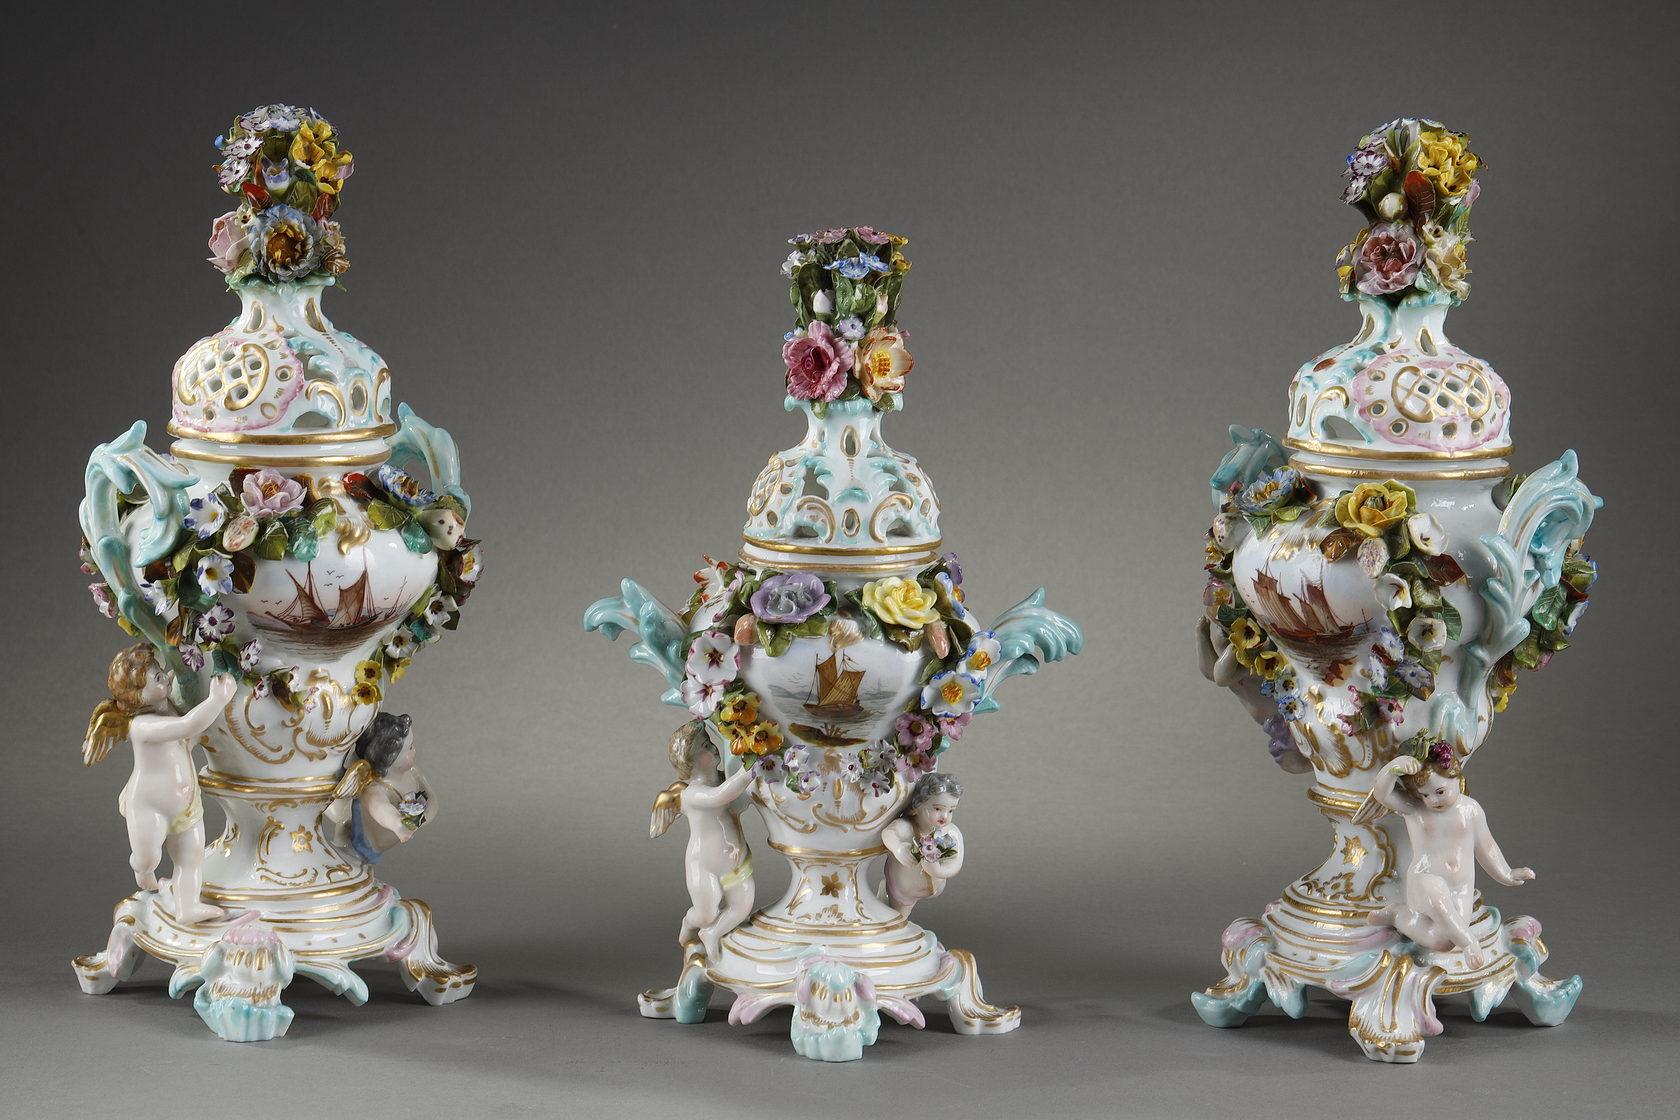 Pair of Polychrome and Gilt Porcelains from the Meissen Manufacture 15